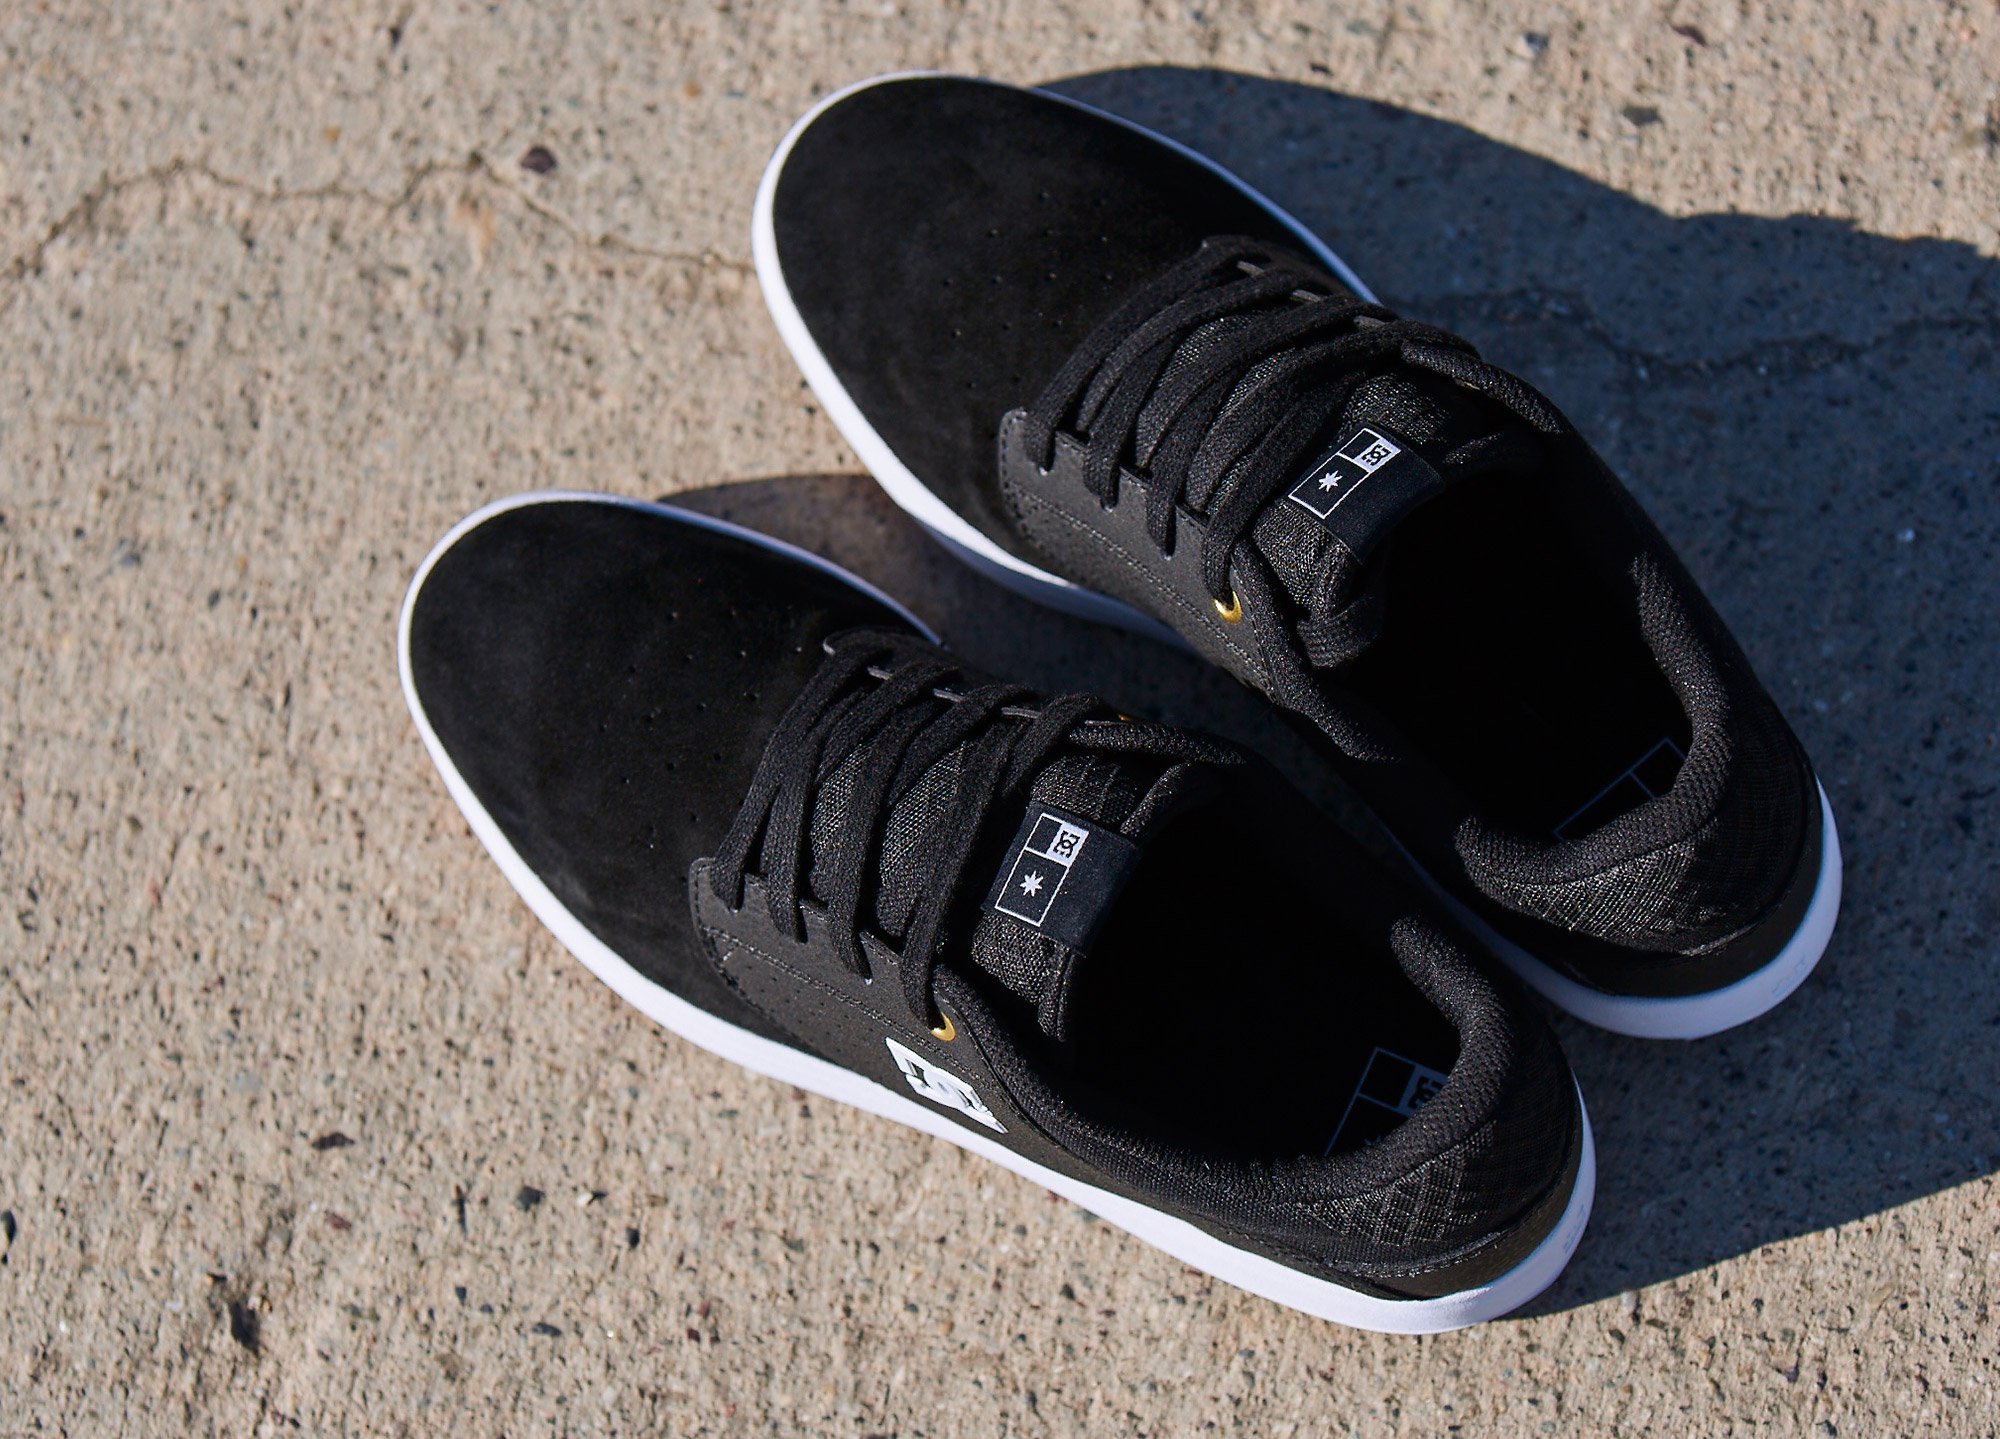 DC Shoes on "Built skate, the Plaza TC with SUPER SUEDE is available in Black/White https://t.co/0md12qBgHc https://t.co/gtQJRB42KA" / Twitter